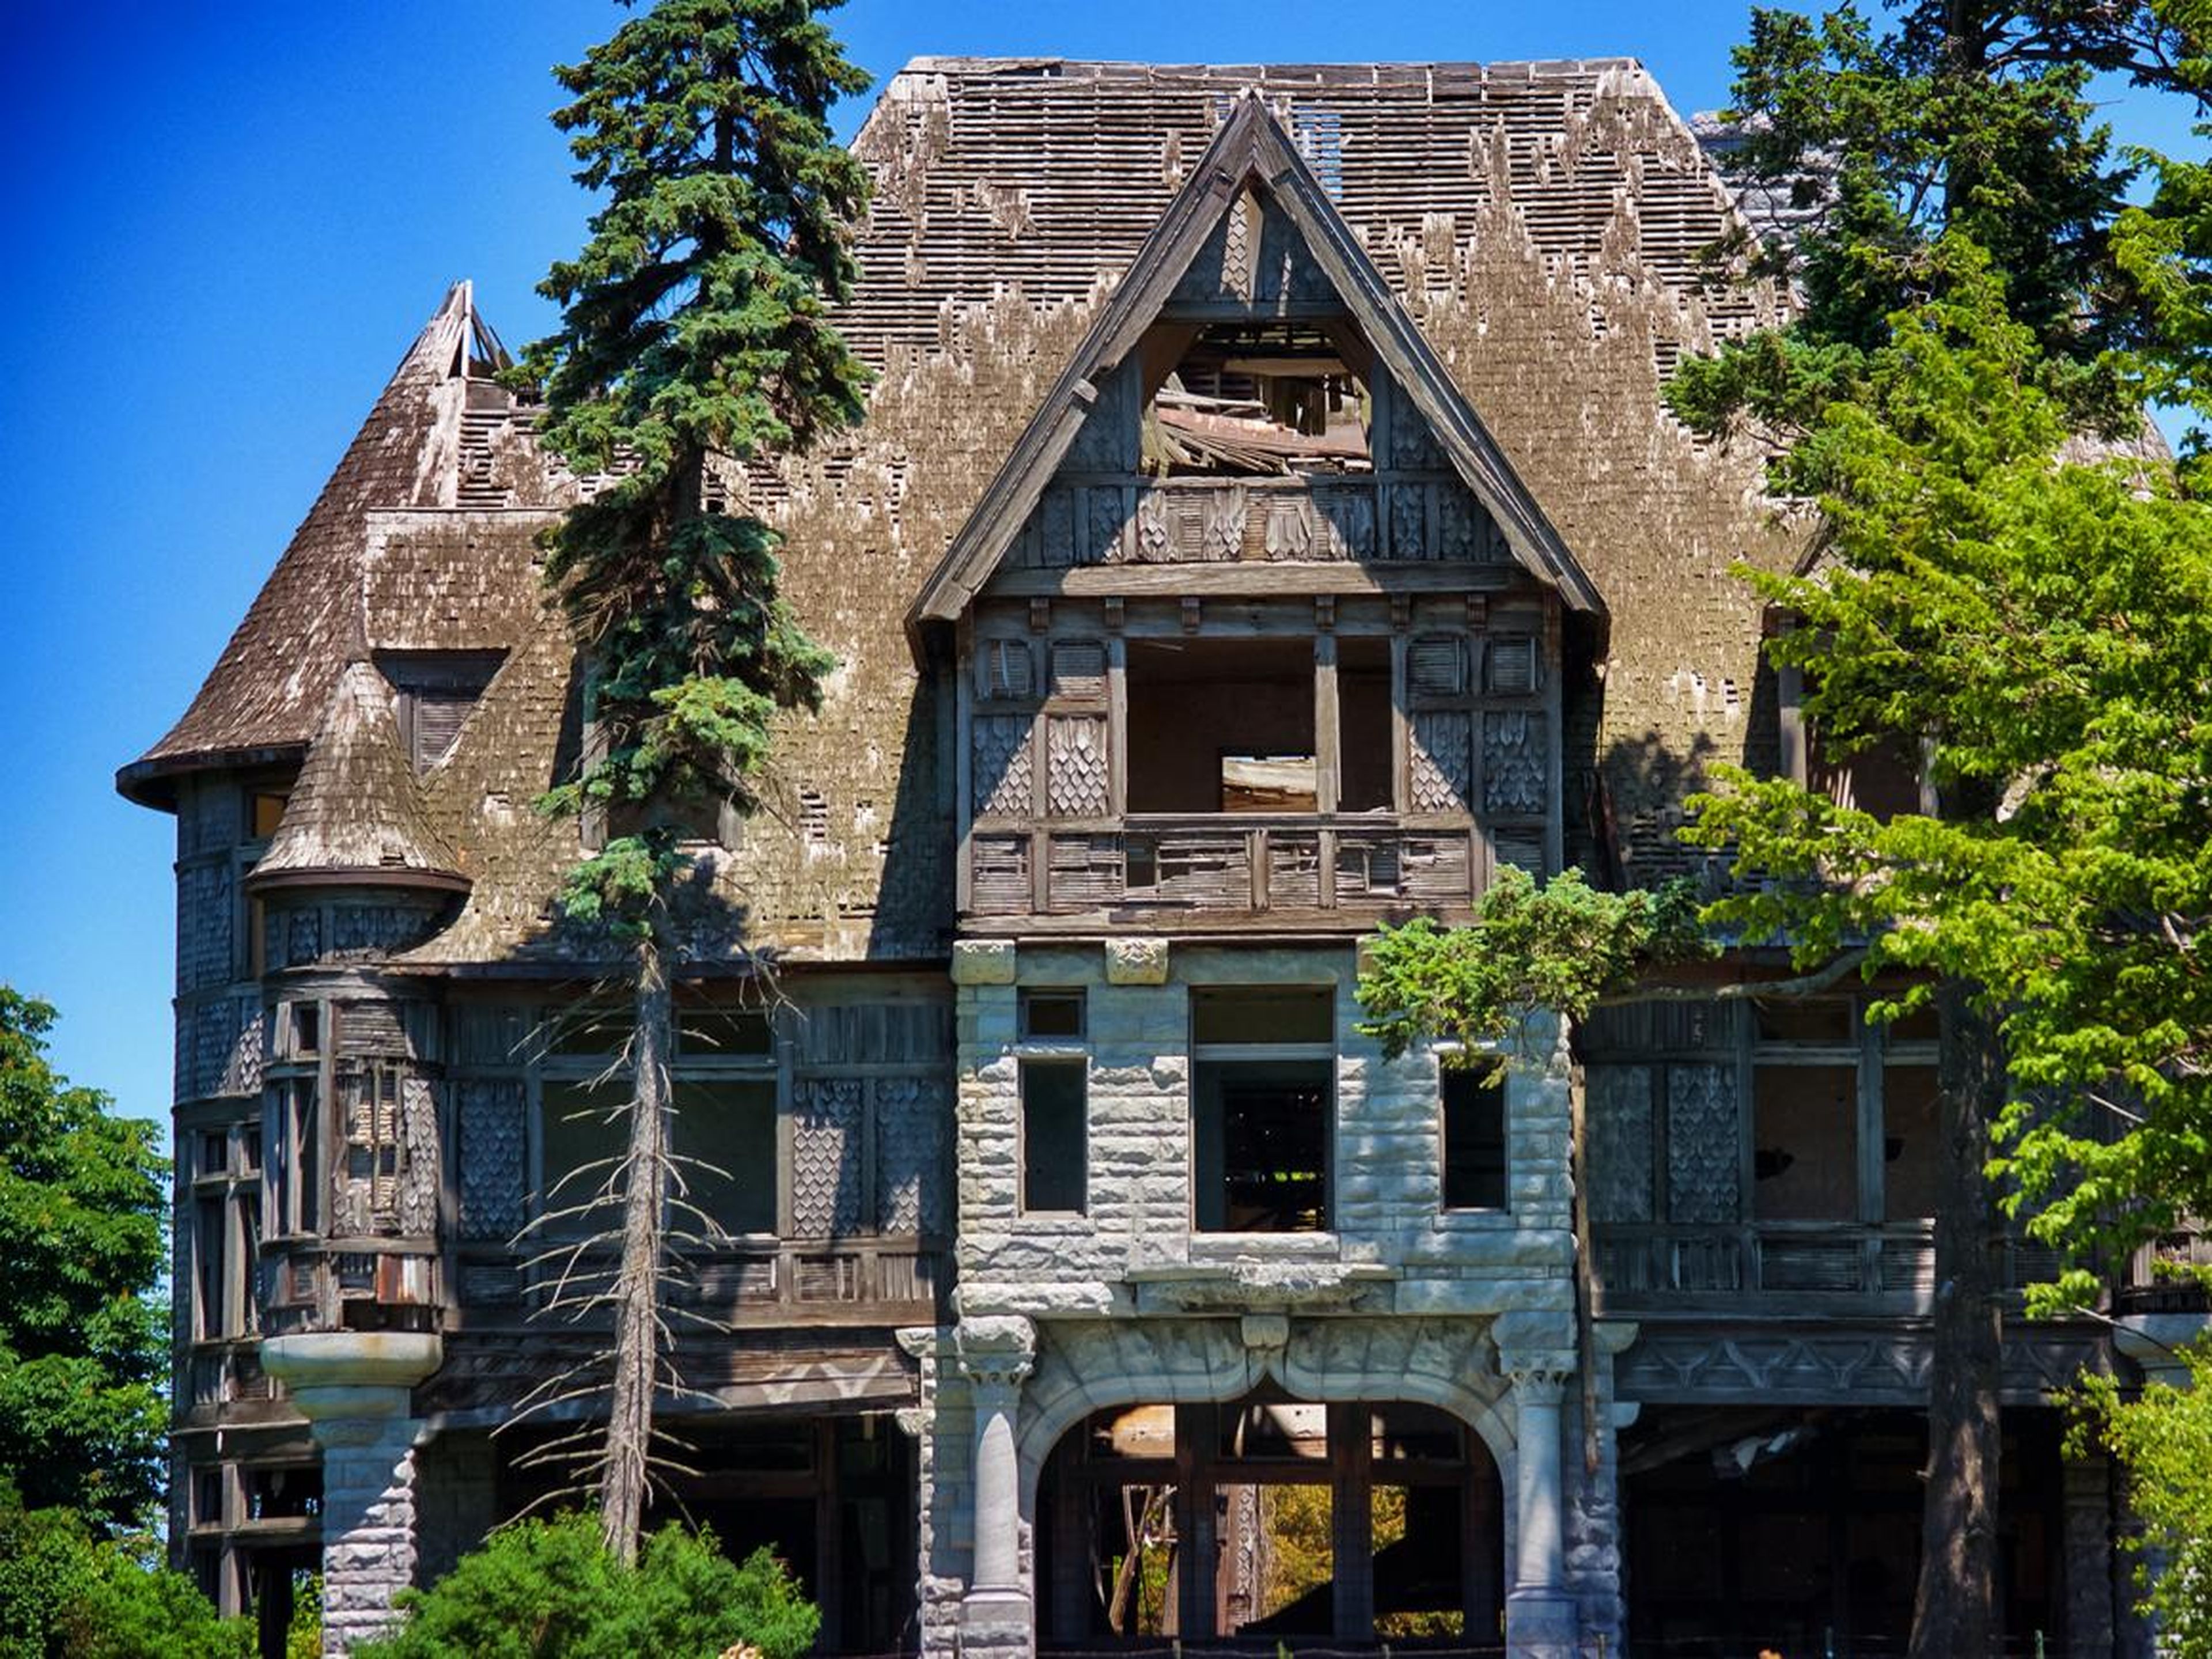 The Carleton Island Villa, a dilapidated mansion that sits on an island in Cape Vincent, New York, hasn't been inhabited for 70 years.